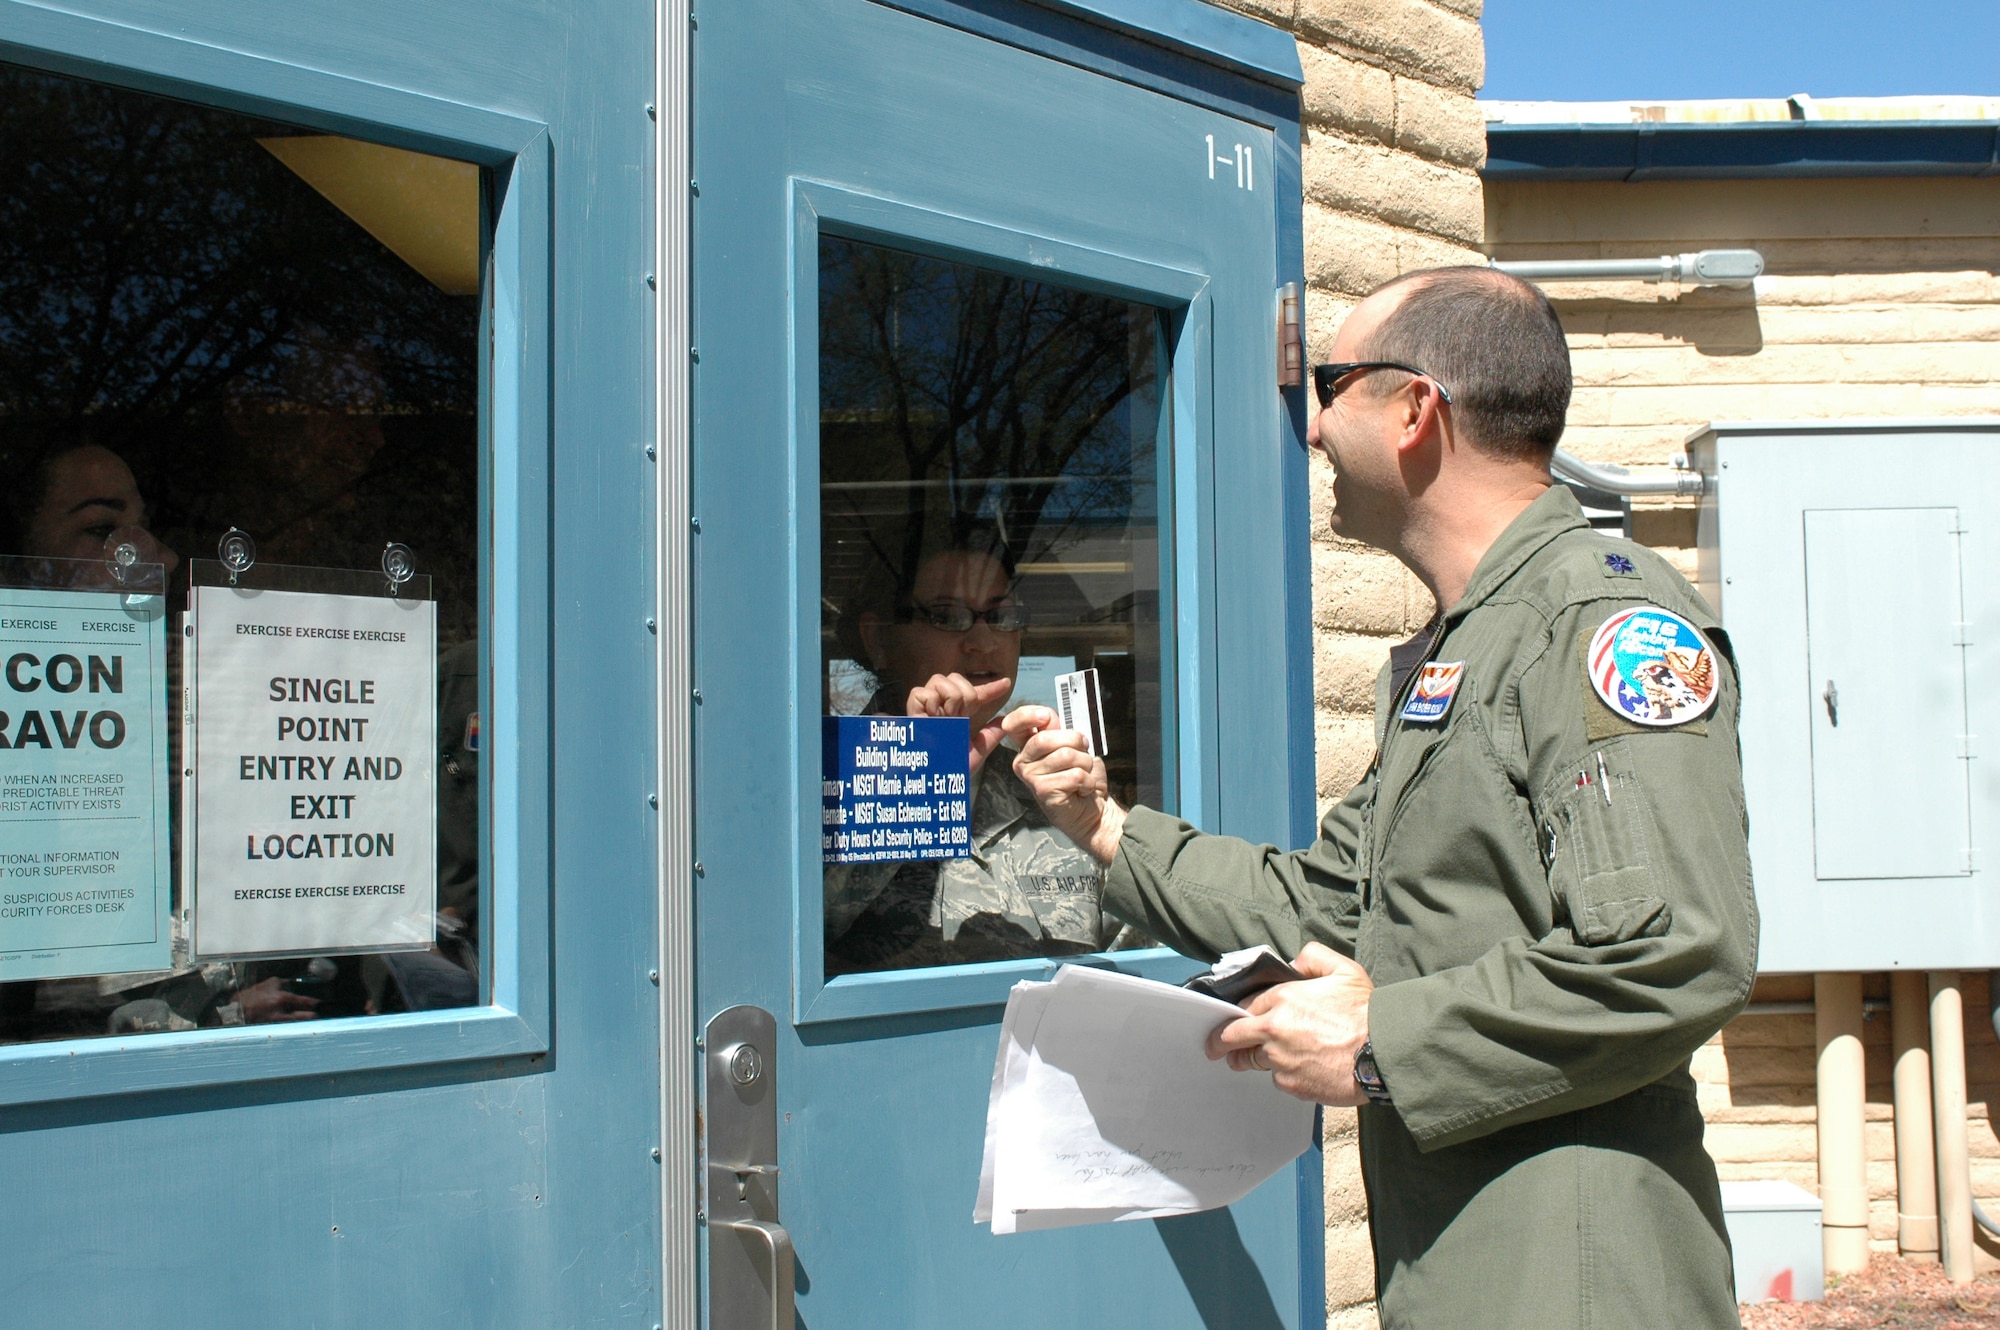 Tech. Sgt. Maria Breceda, from the 162nd Force Support Squadron, checks the identification of Lt. Col. John Bobroski, the wing’s Air Force Advisor, before entering the wing headquarters building March 13 as part of a compliance inspection exercise. The 162nd Fighter Wing at Tucson International Airport is hosting an inspection team from Air Education and Training Command March 10-16. (Air Force photo by Tech. Sgt. Desiree Twombly)